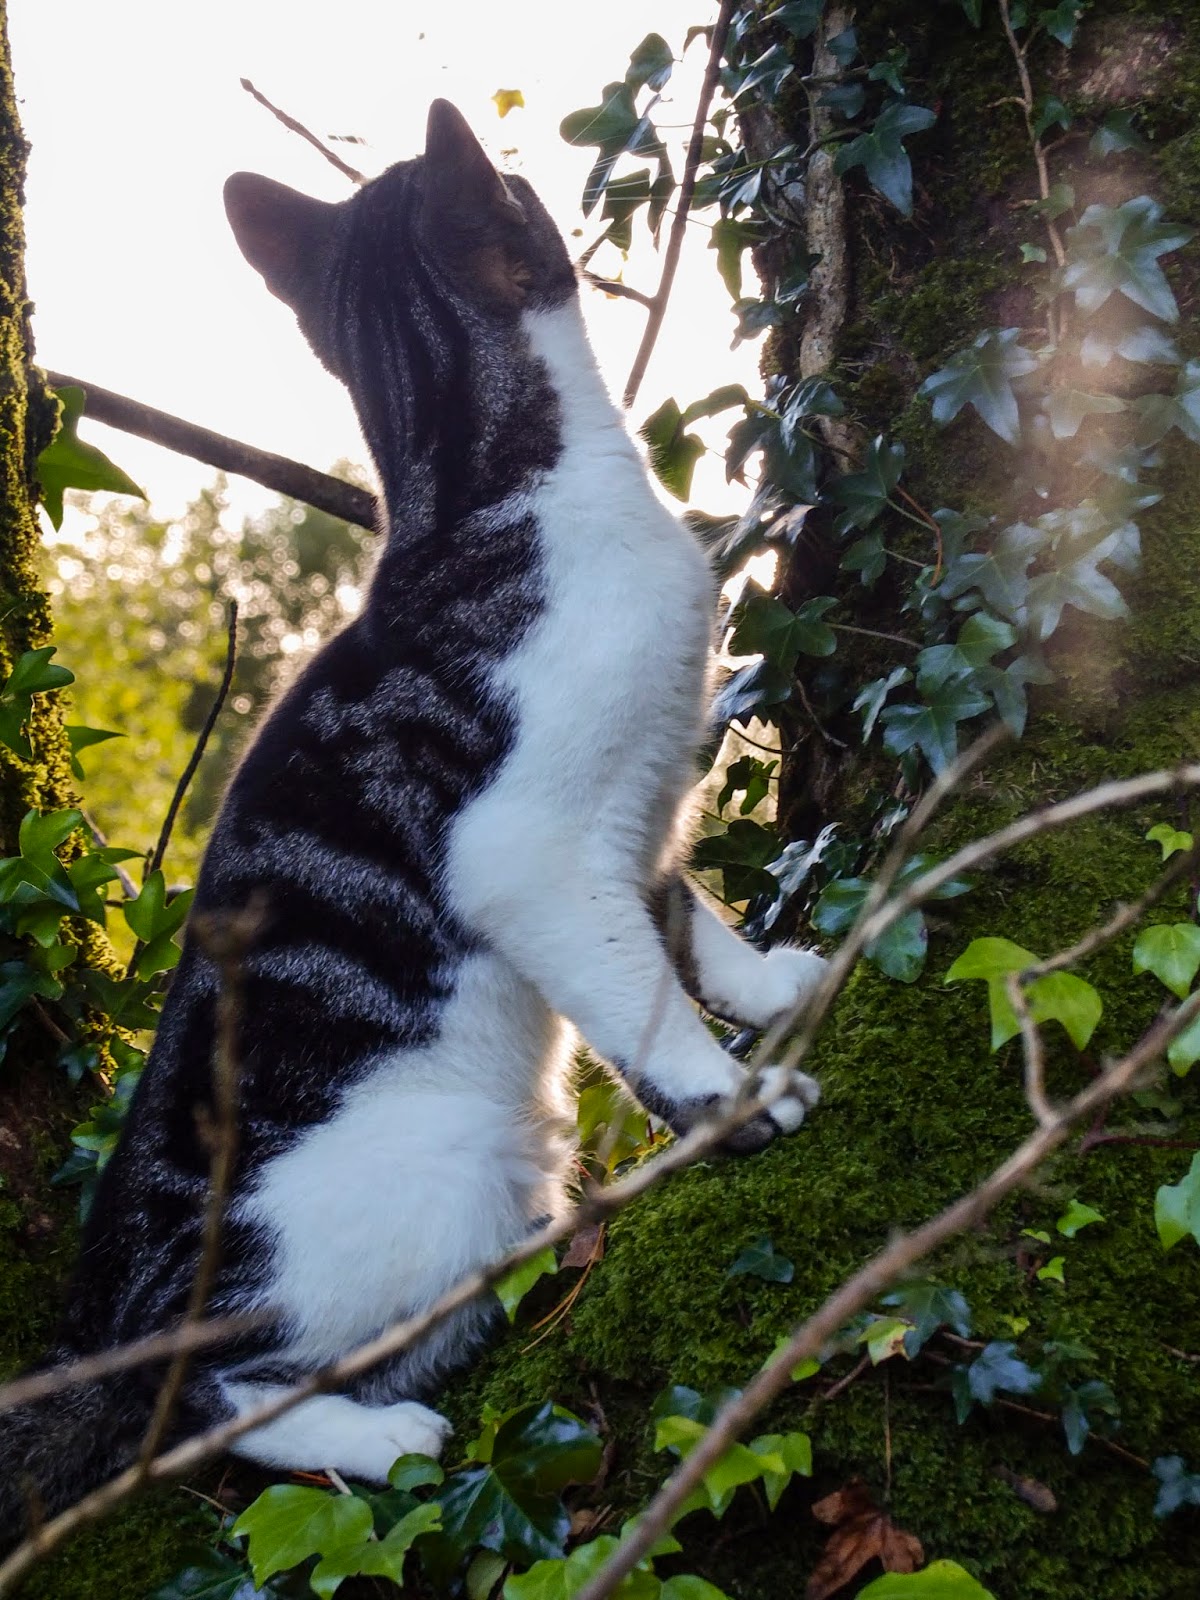 A cat standing up at the base of a tree.